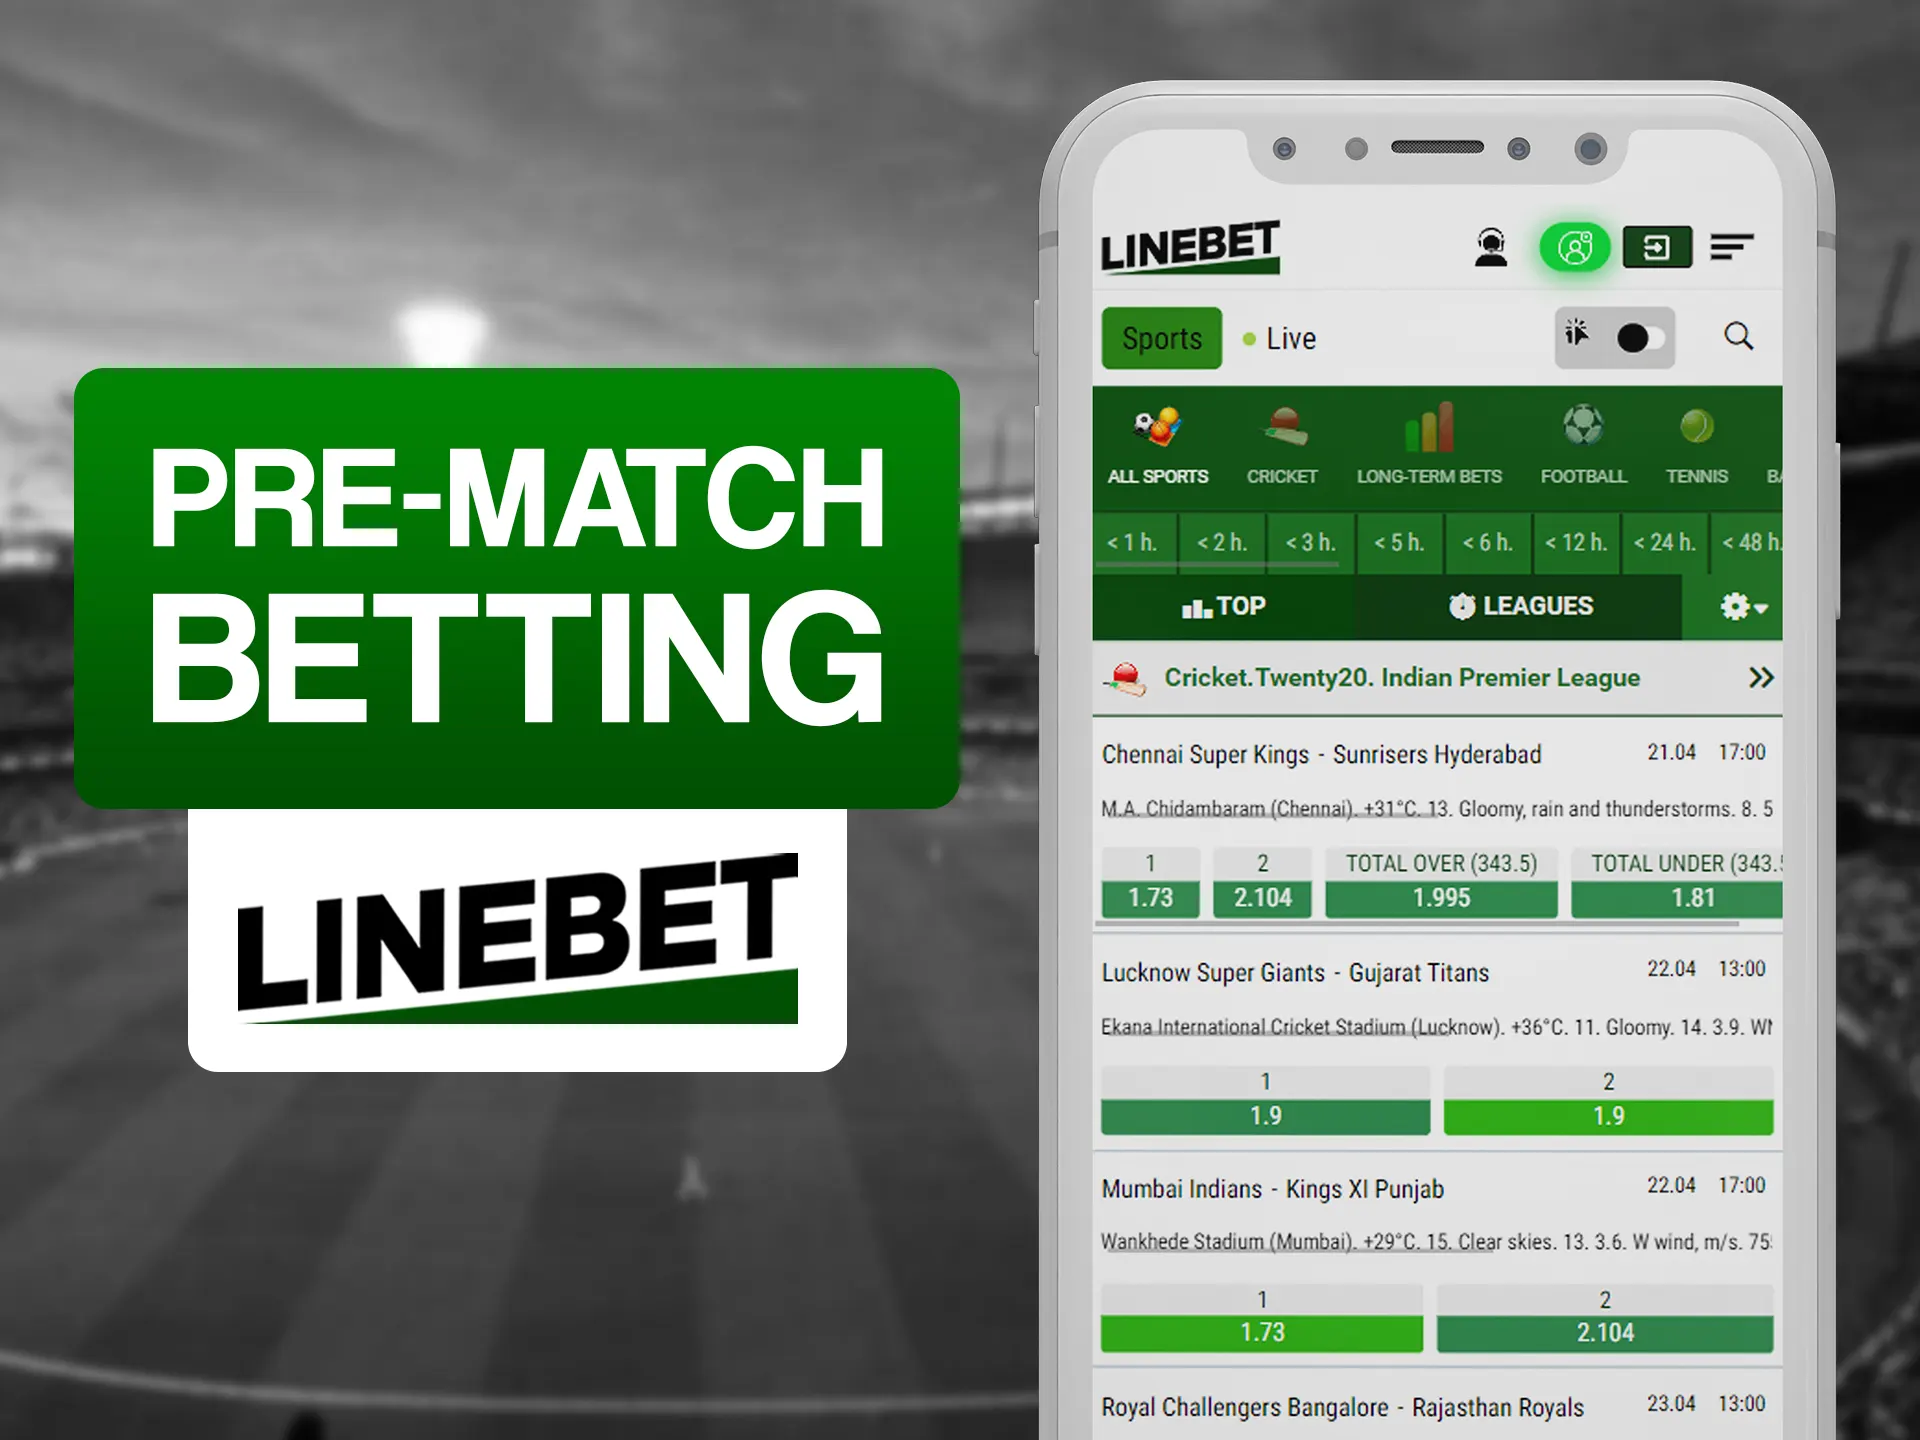 Make your bet before match starts in Linbet app.